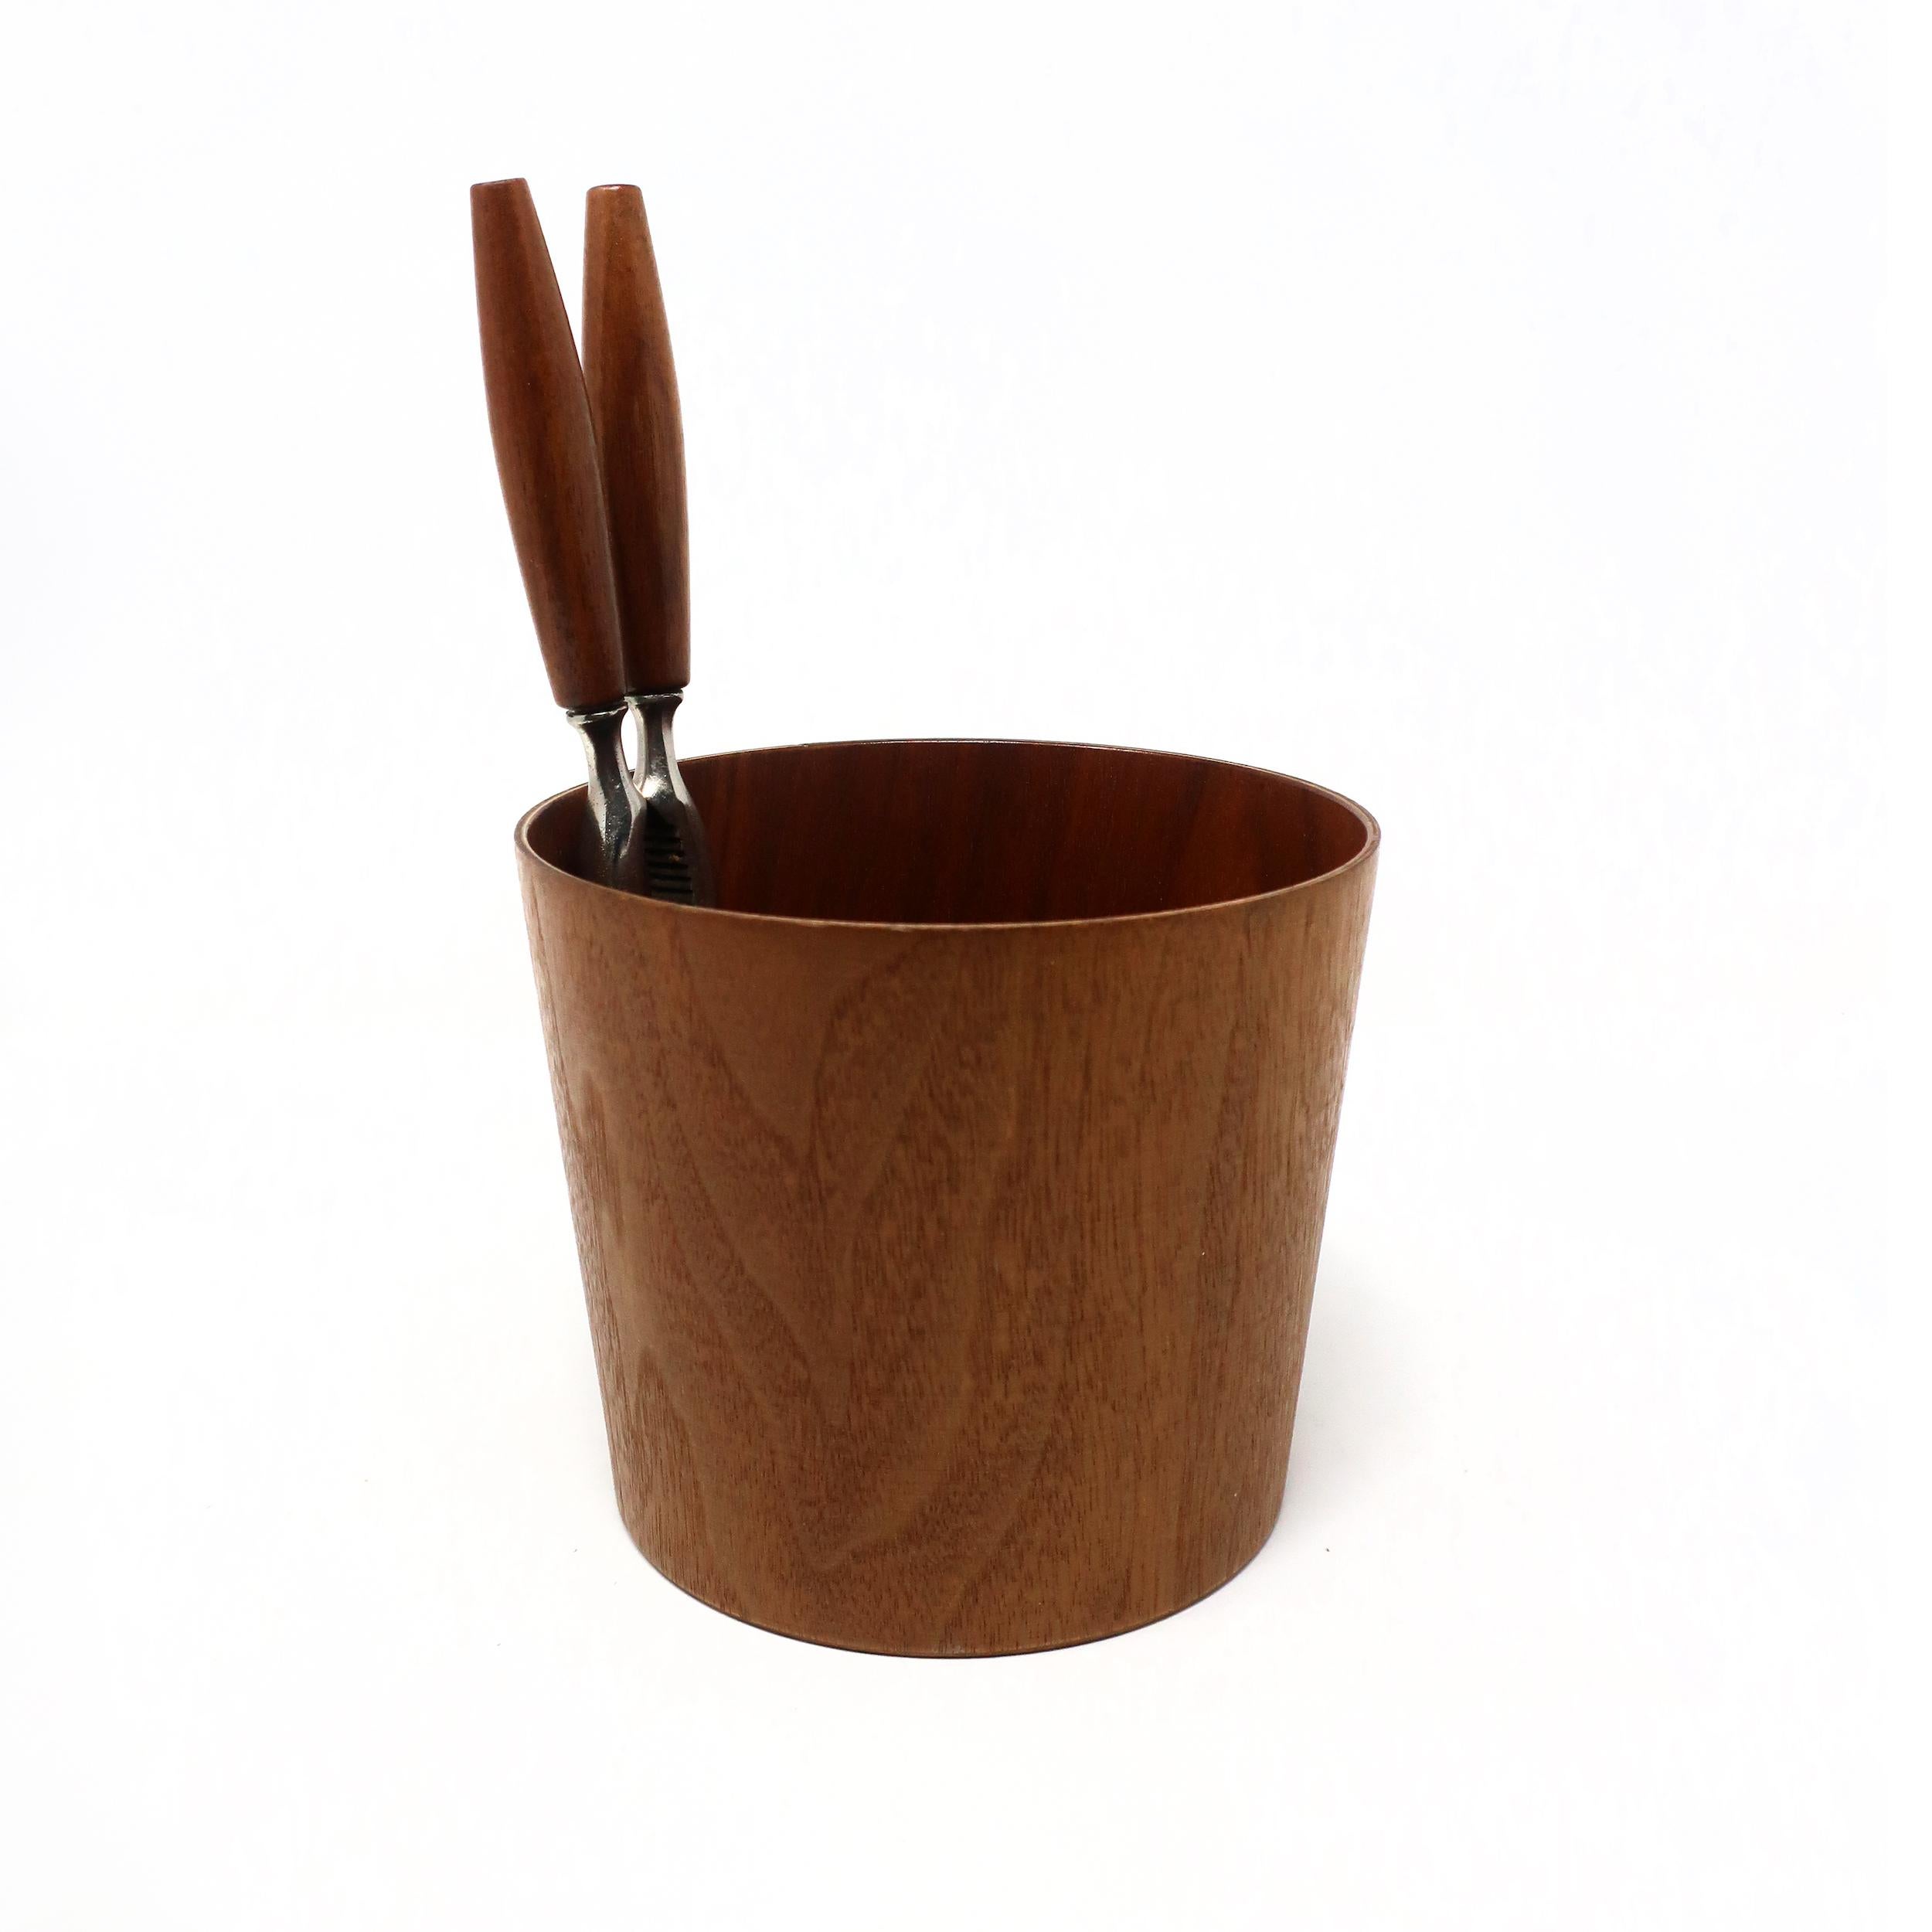 Swedish design house Rainbow Wood Products specialized in streamlined home and office accessories in teak veneer. Designed by Martin Åberg as a nut bowl with nutcracker, this teak receptacle has a delicately flared conical shape and interior pocket